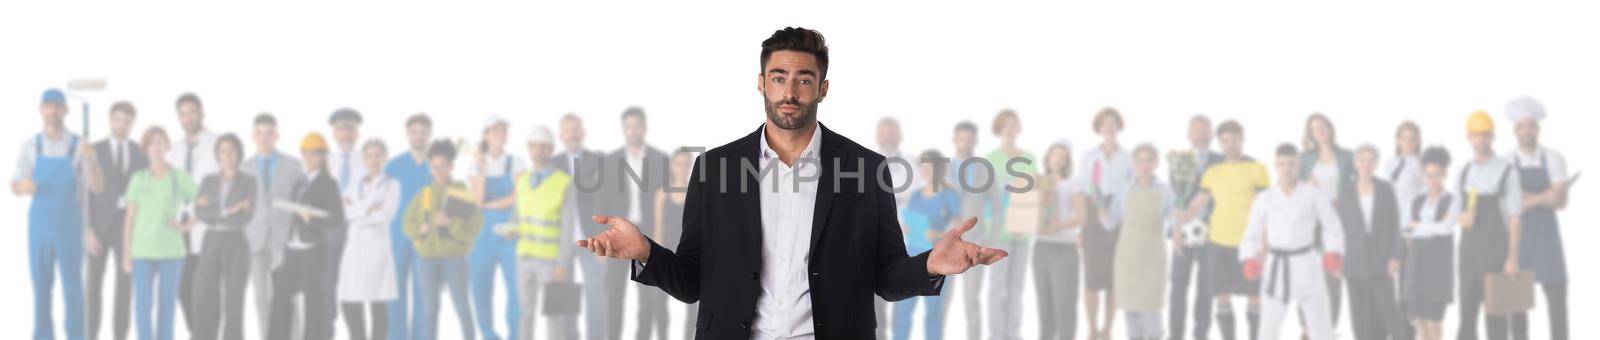 Thoughtful confused man choosing probable profession, many professionals people, isolated on white background